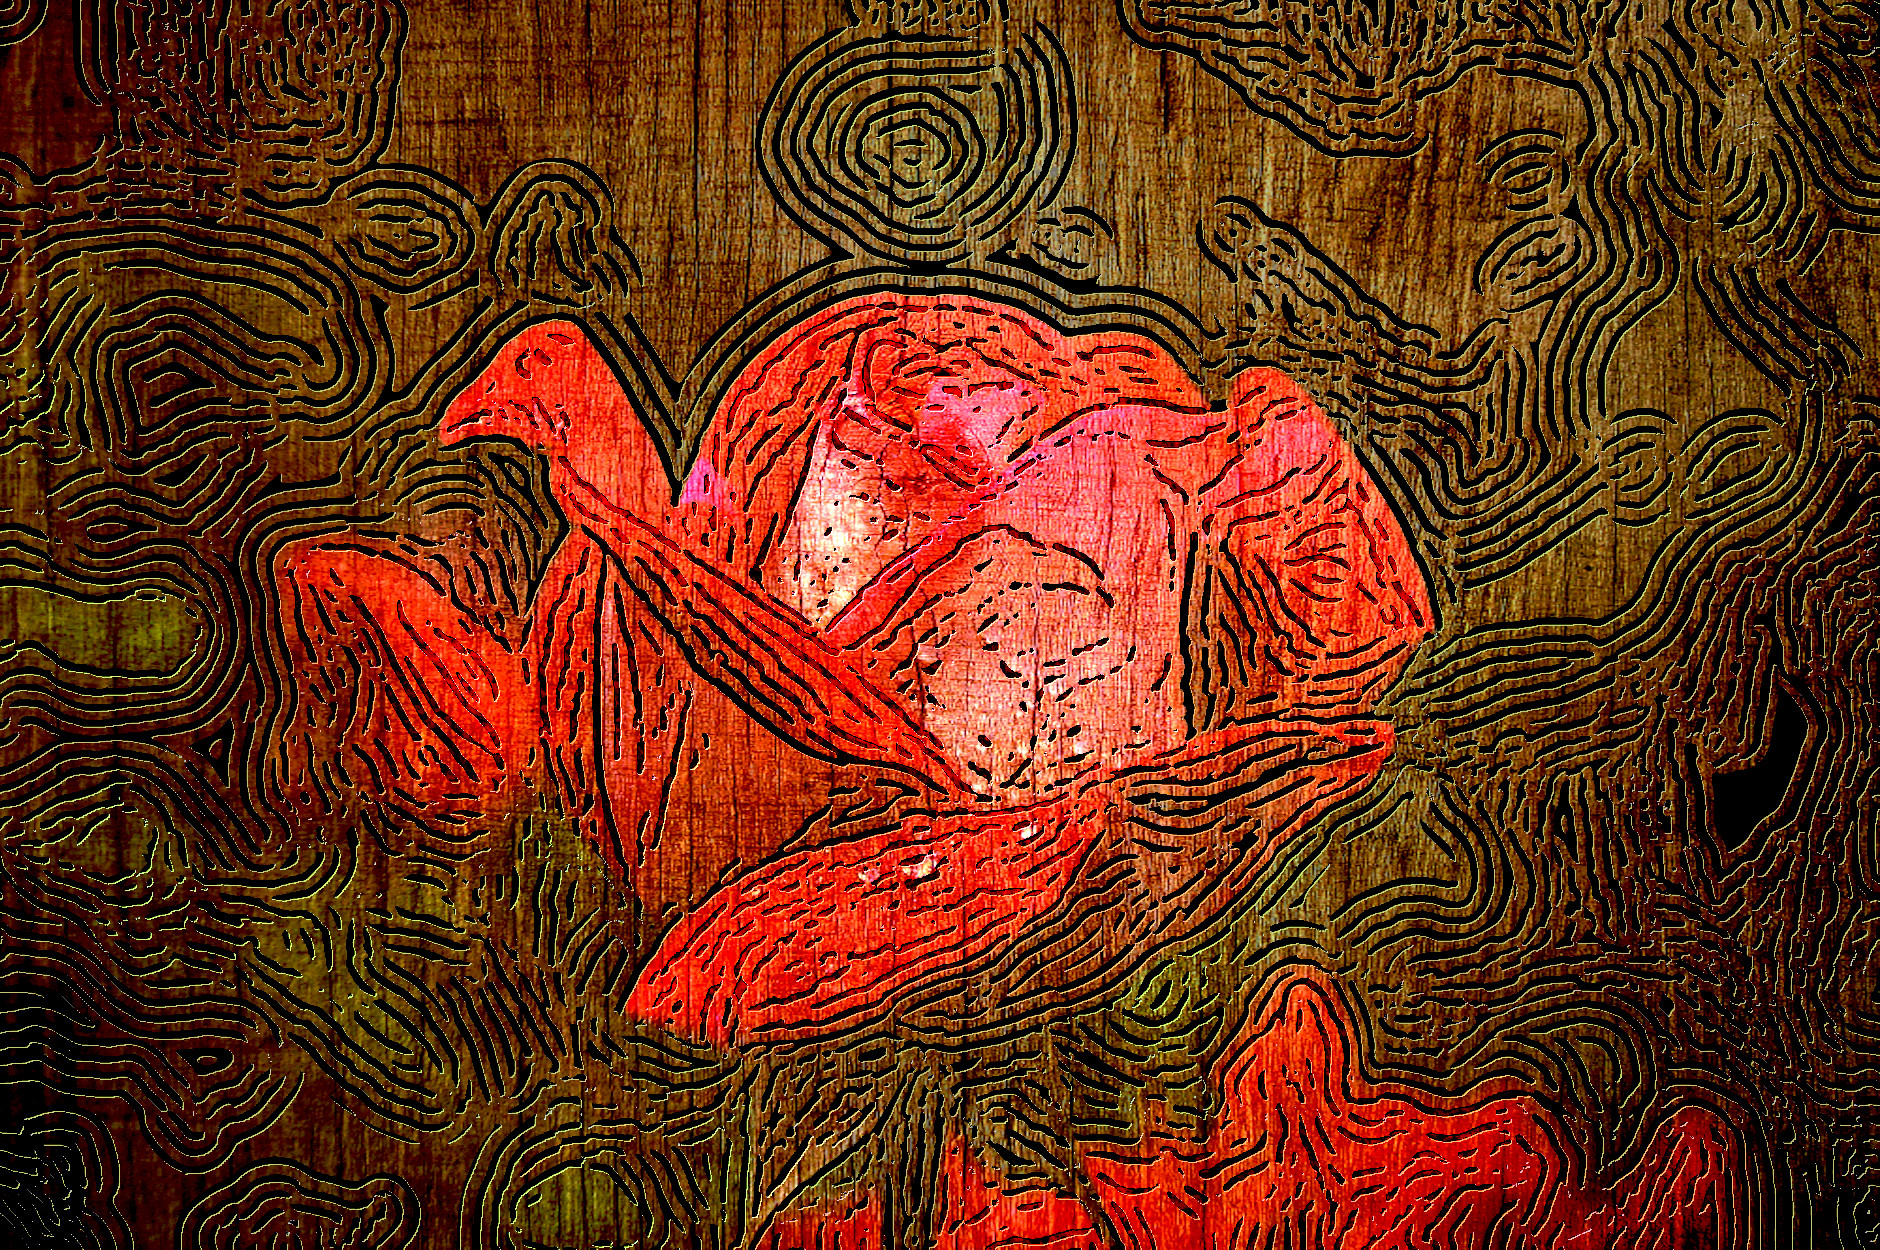 2020-02-07 05-49-15garden-rose-red-pink-56866 as a drawing engraved on Wood Wood_26.jpg, option dark, hard, touched up on top.jpg